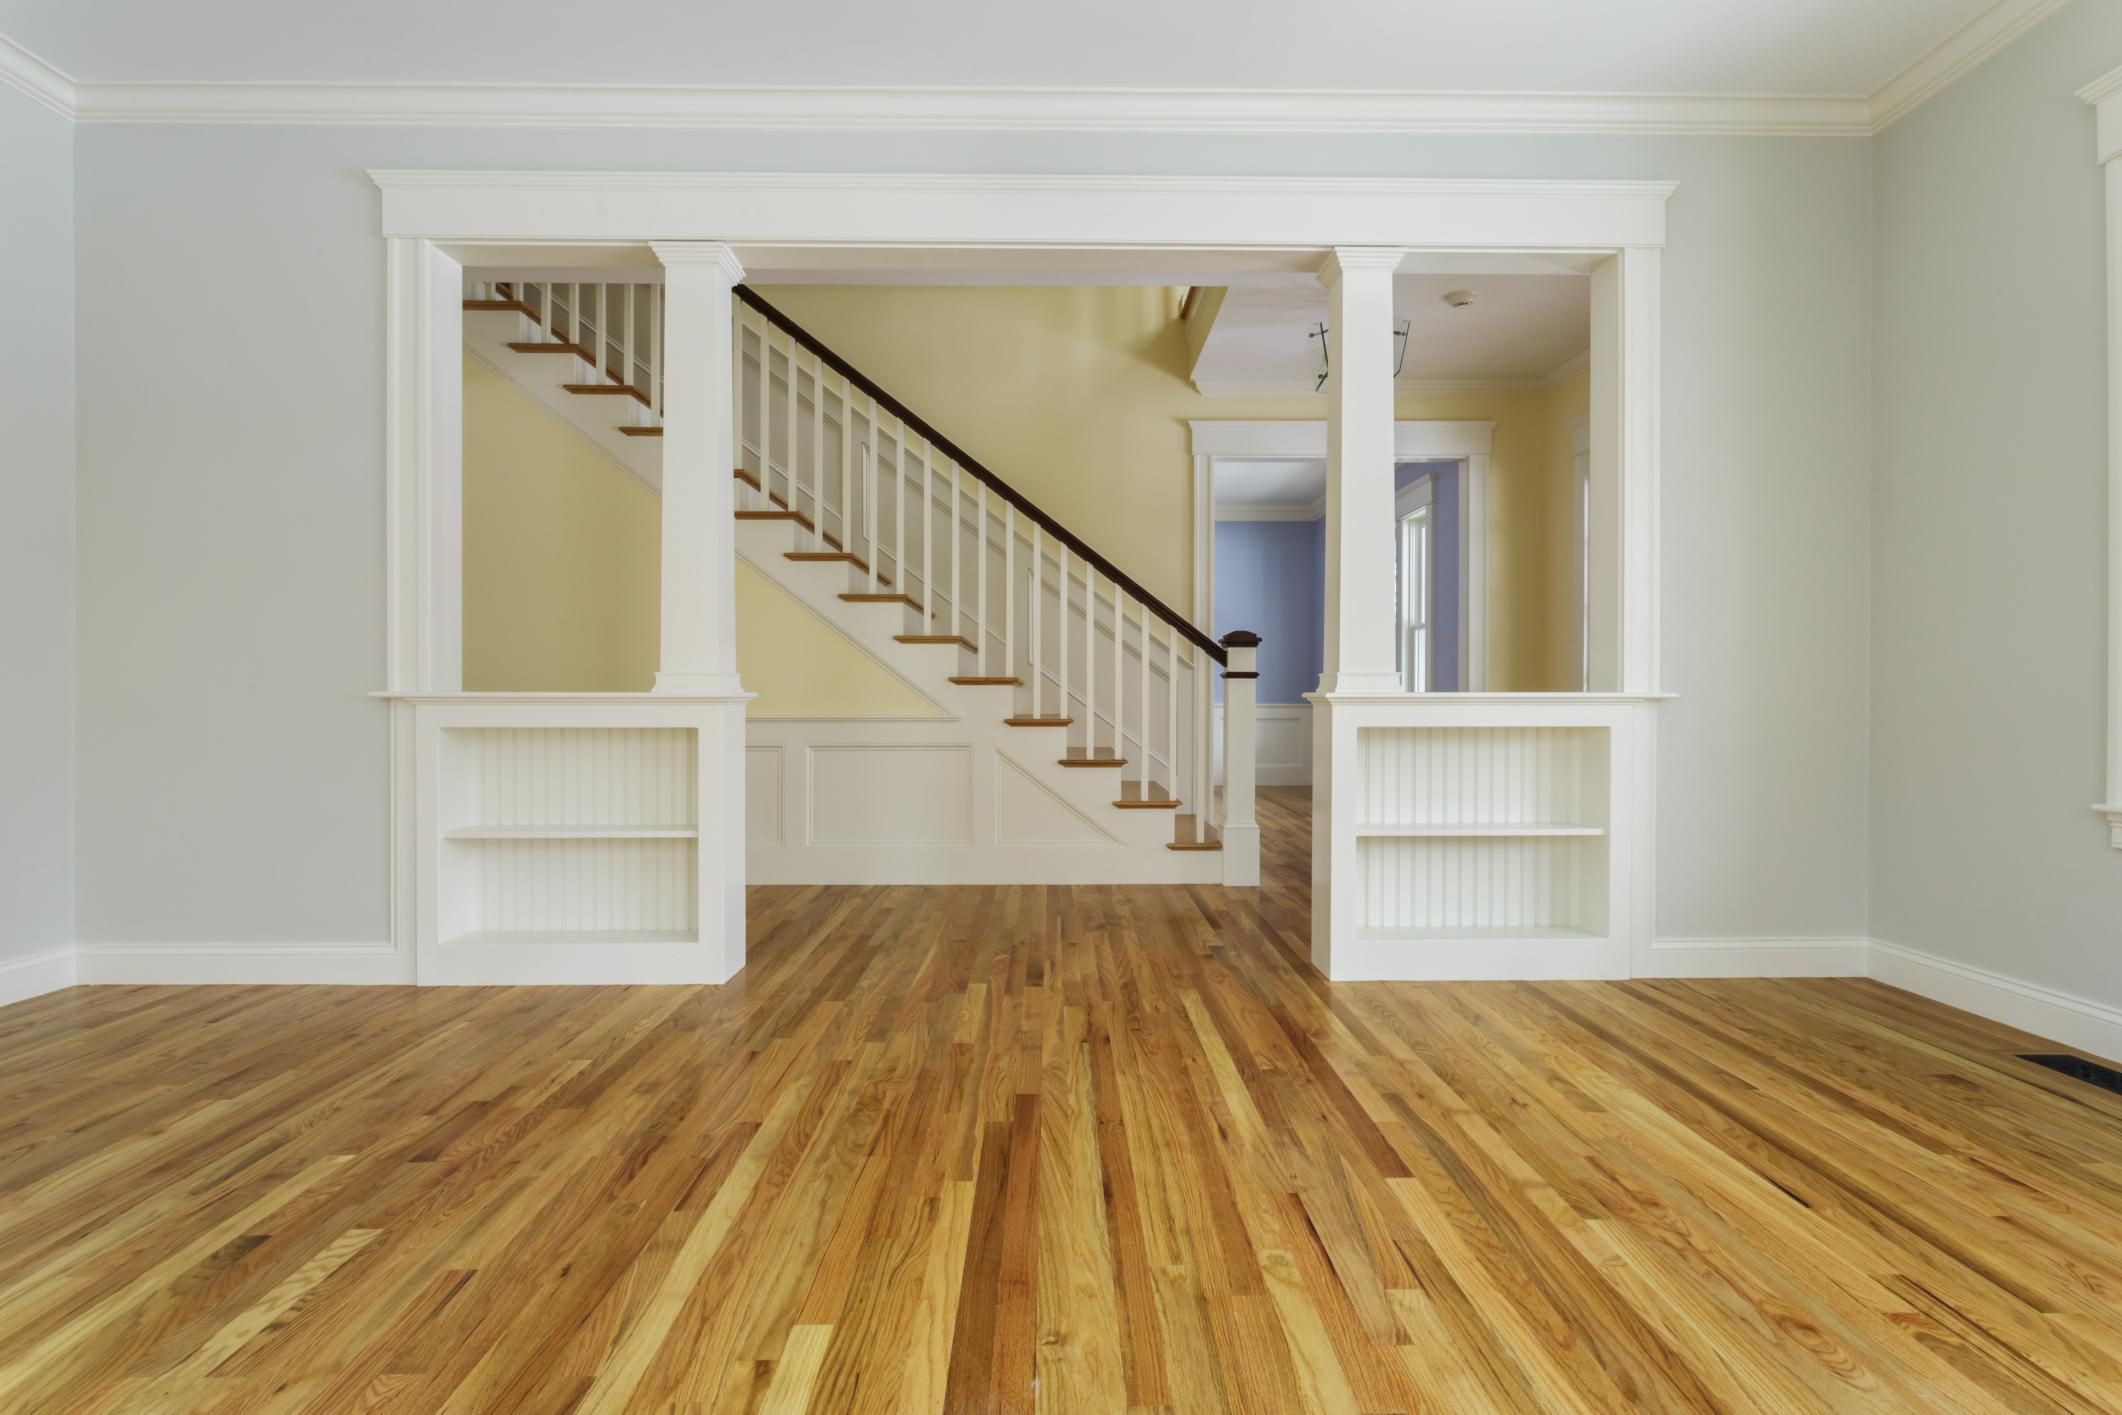 18 Famous How Do You Refinish Hardwood Floors Yourself 2024 free download how do you refinish hardwood floors yourself of guide to solid hardwood floors within 168686571 56a49f213df78cf772834e24